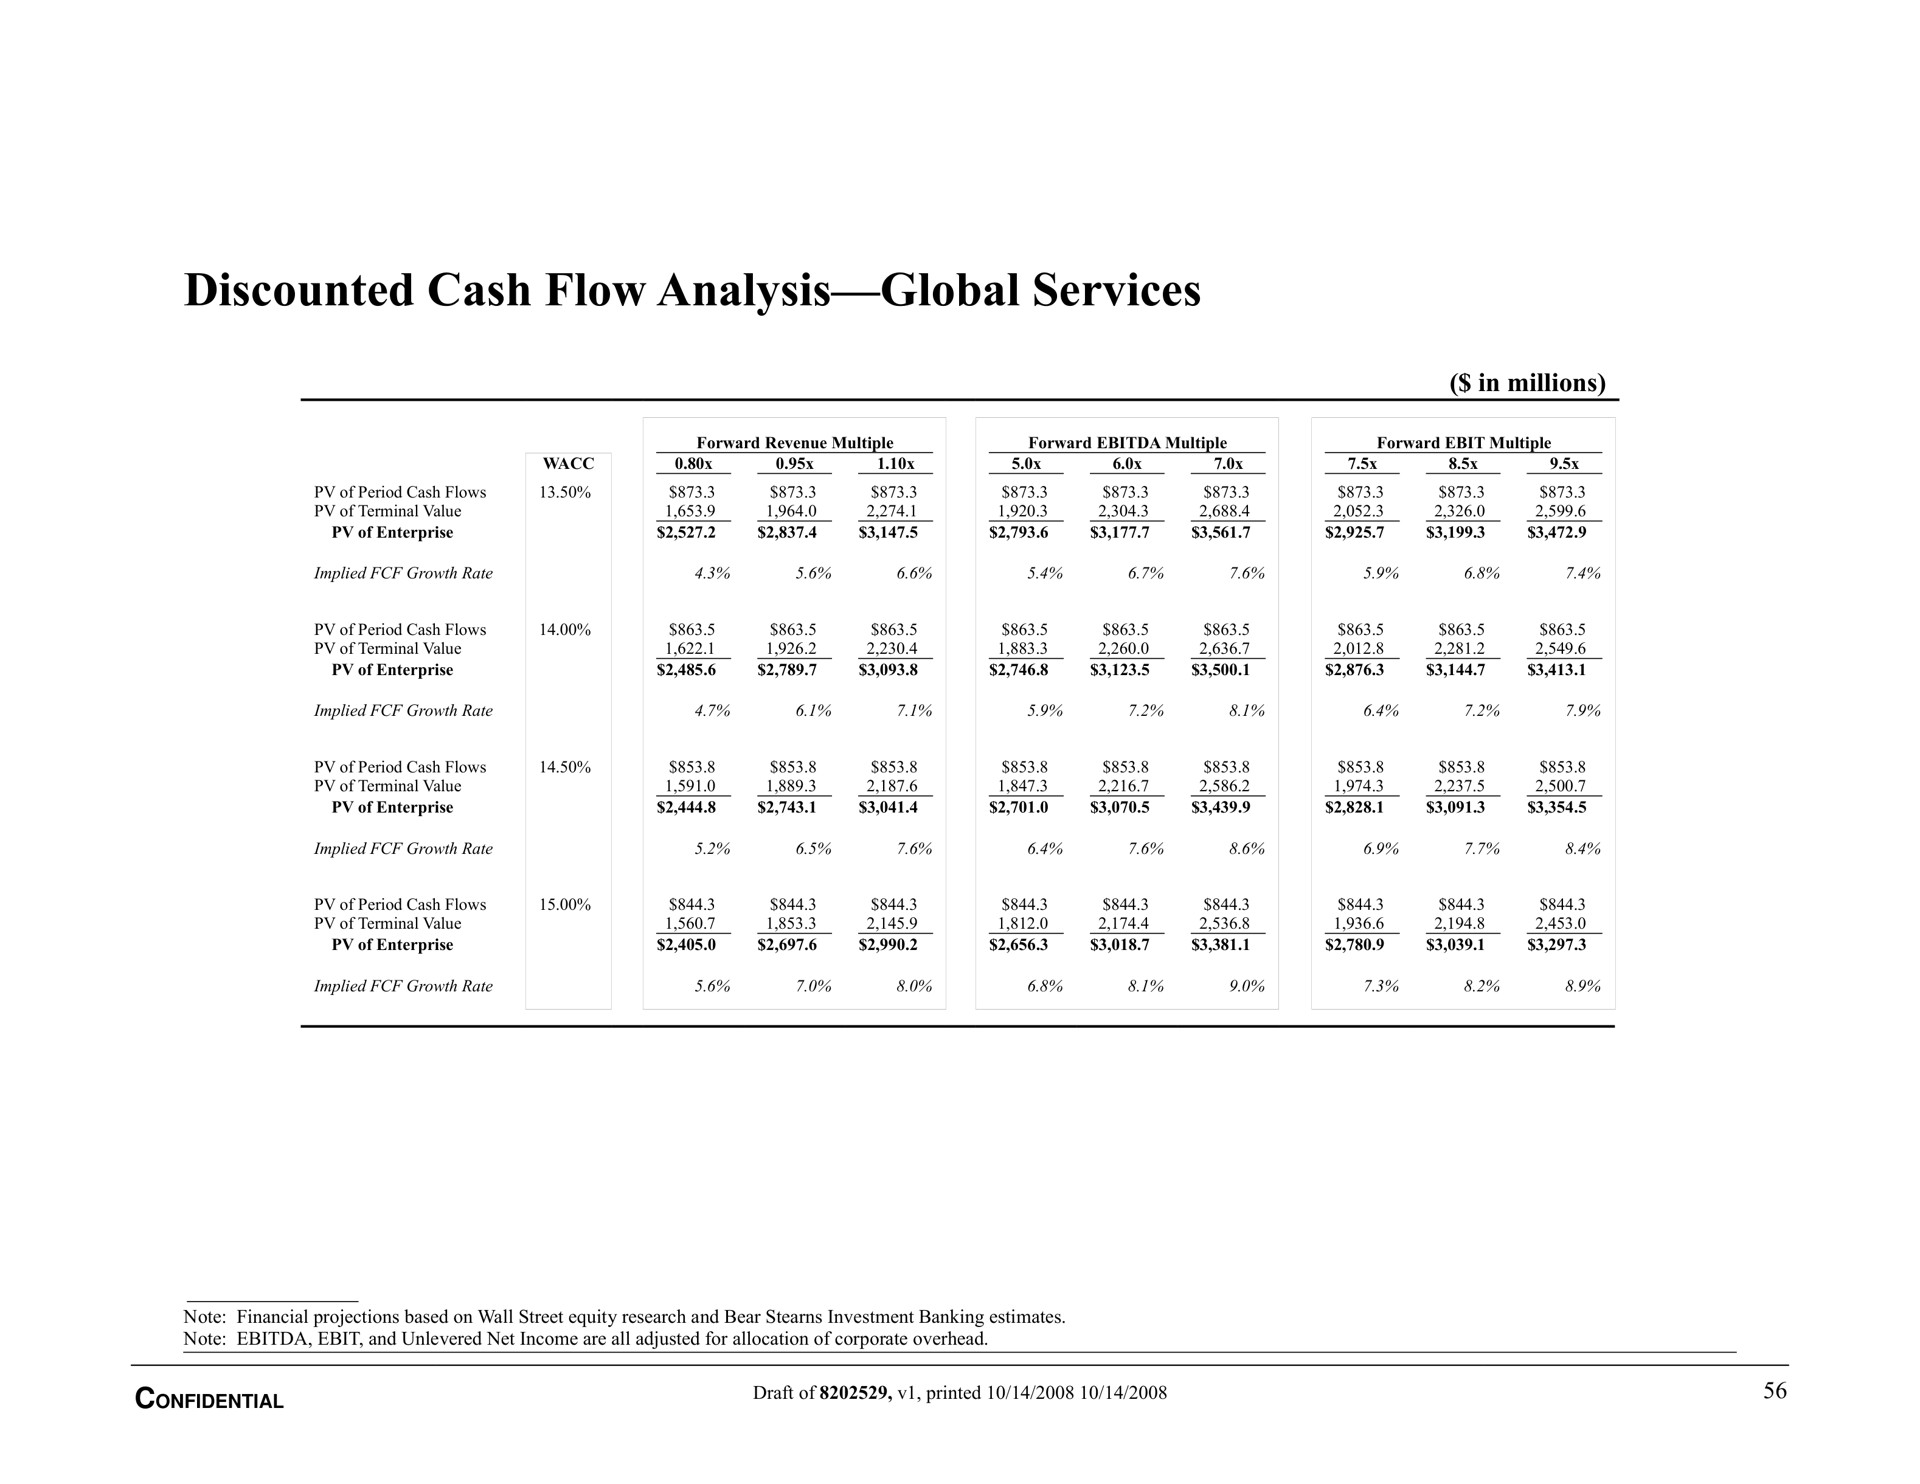 discounted cash flow analysis global services | Bear Stearns